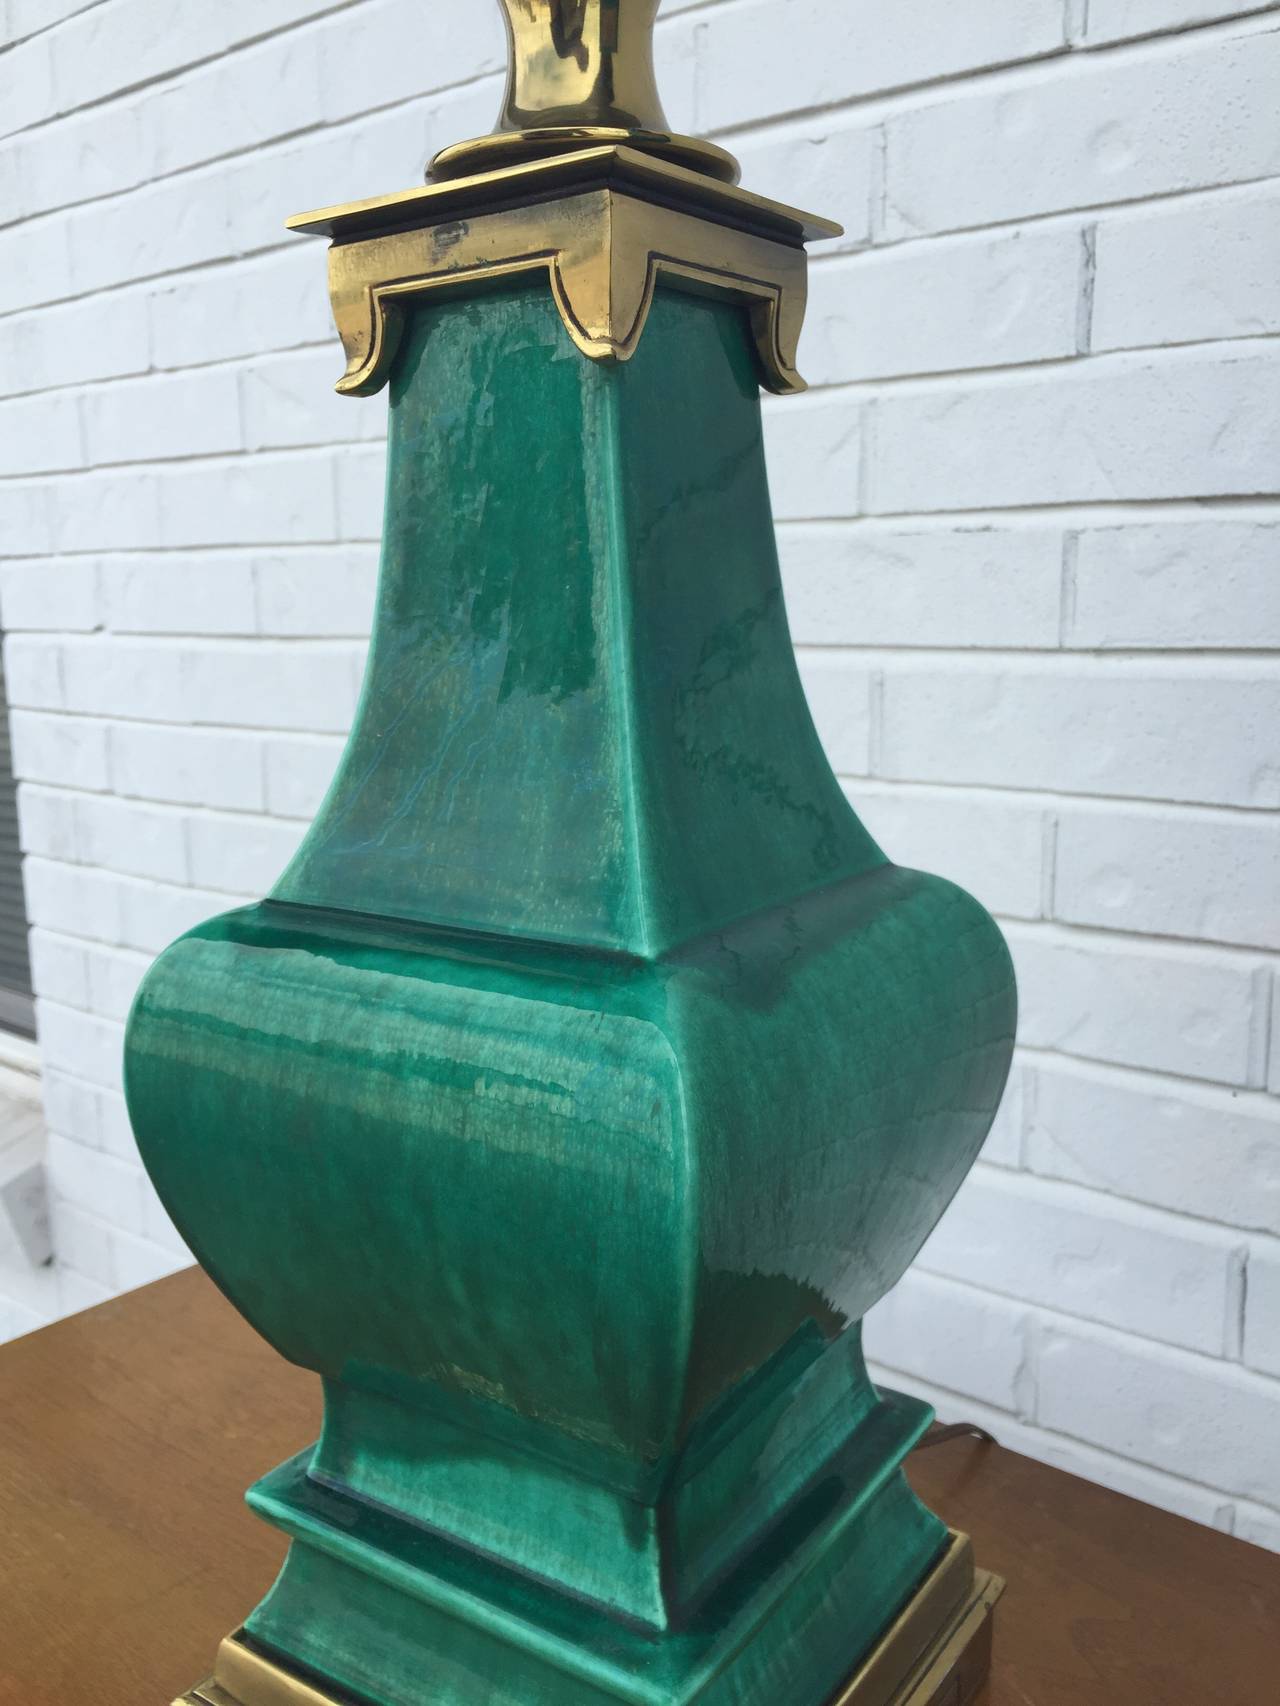 Imperial green glazed chinoiserie ceramic lamp with brass fittings, made by Stiffel, 1950s.